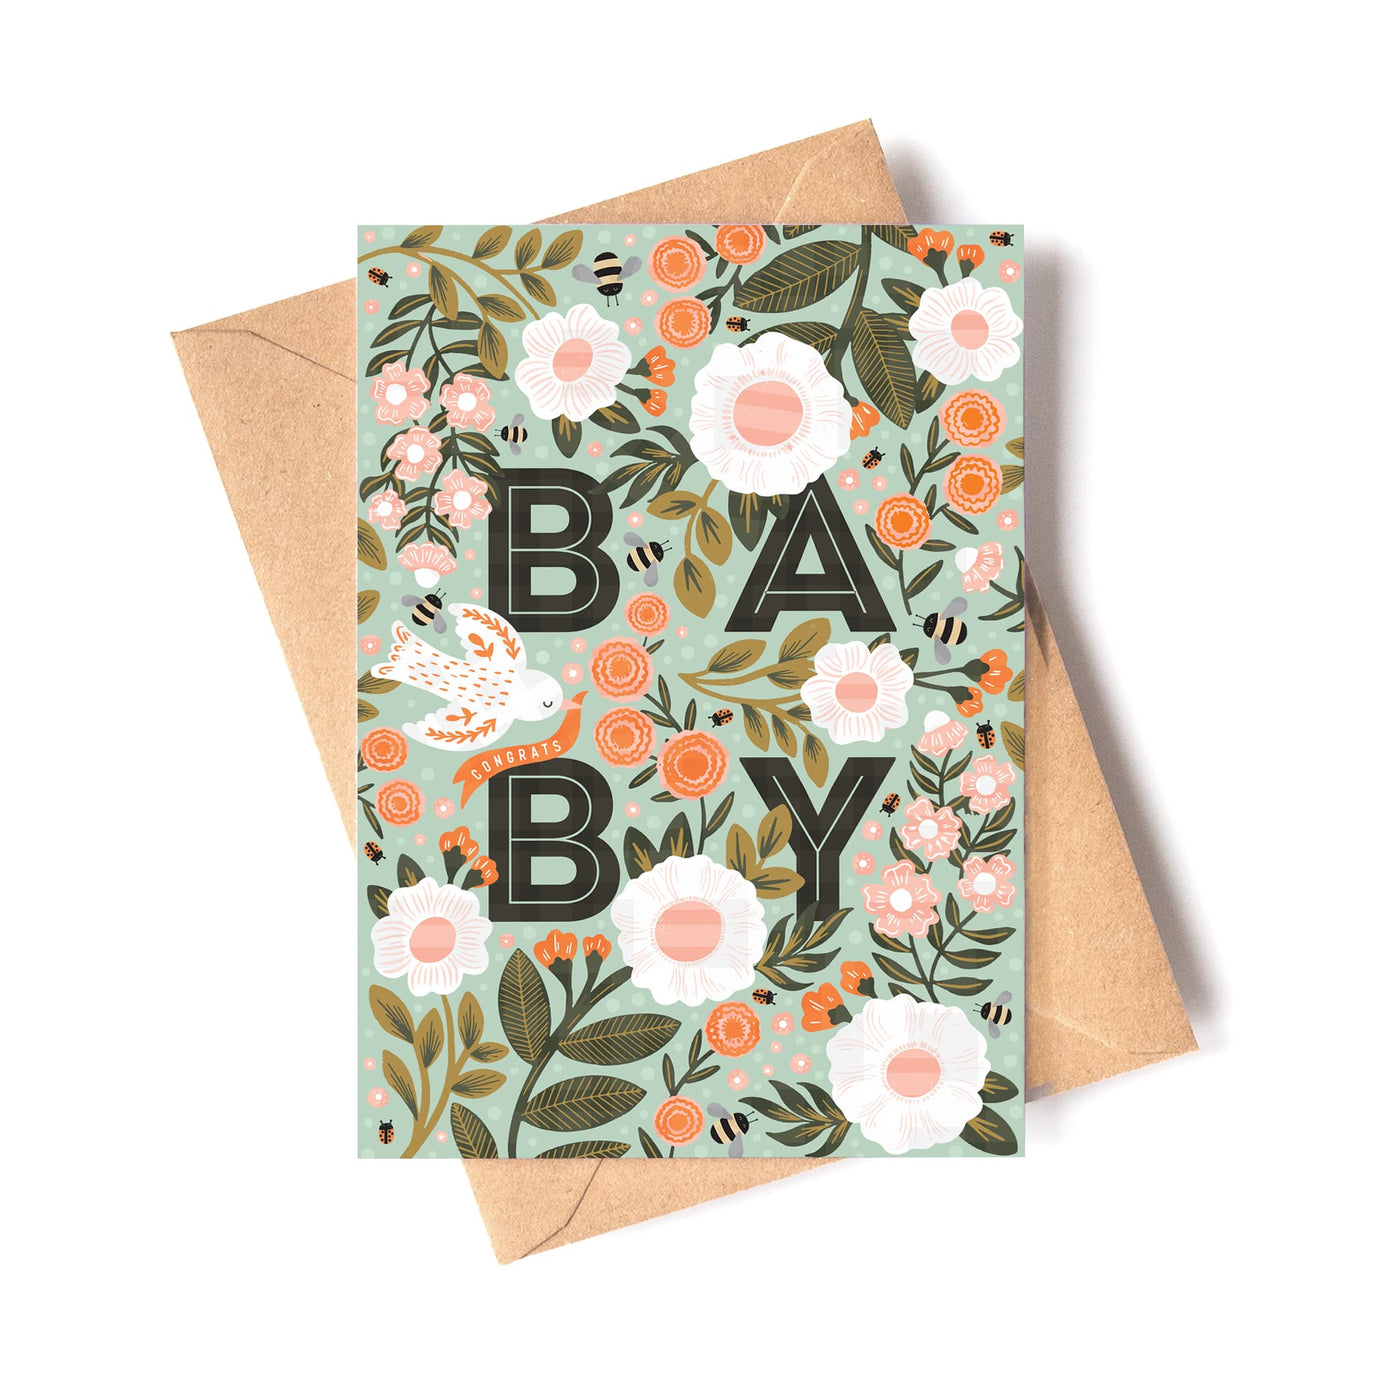 The image shows a Floral New Baby Card  and kraft envelope.The illustration on the card features large white peonies and foliage wound around the bold letters of baby, along with some birds, bees and bugs